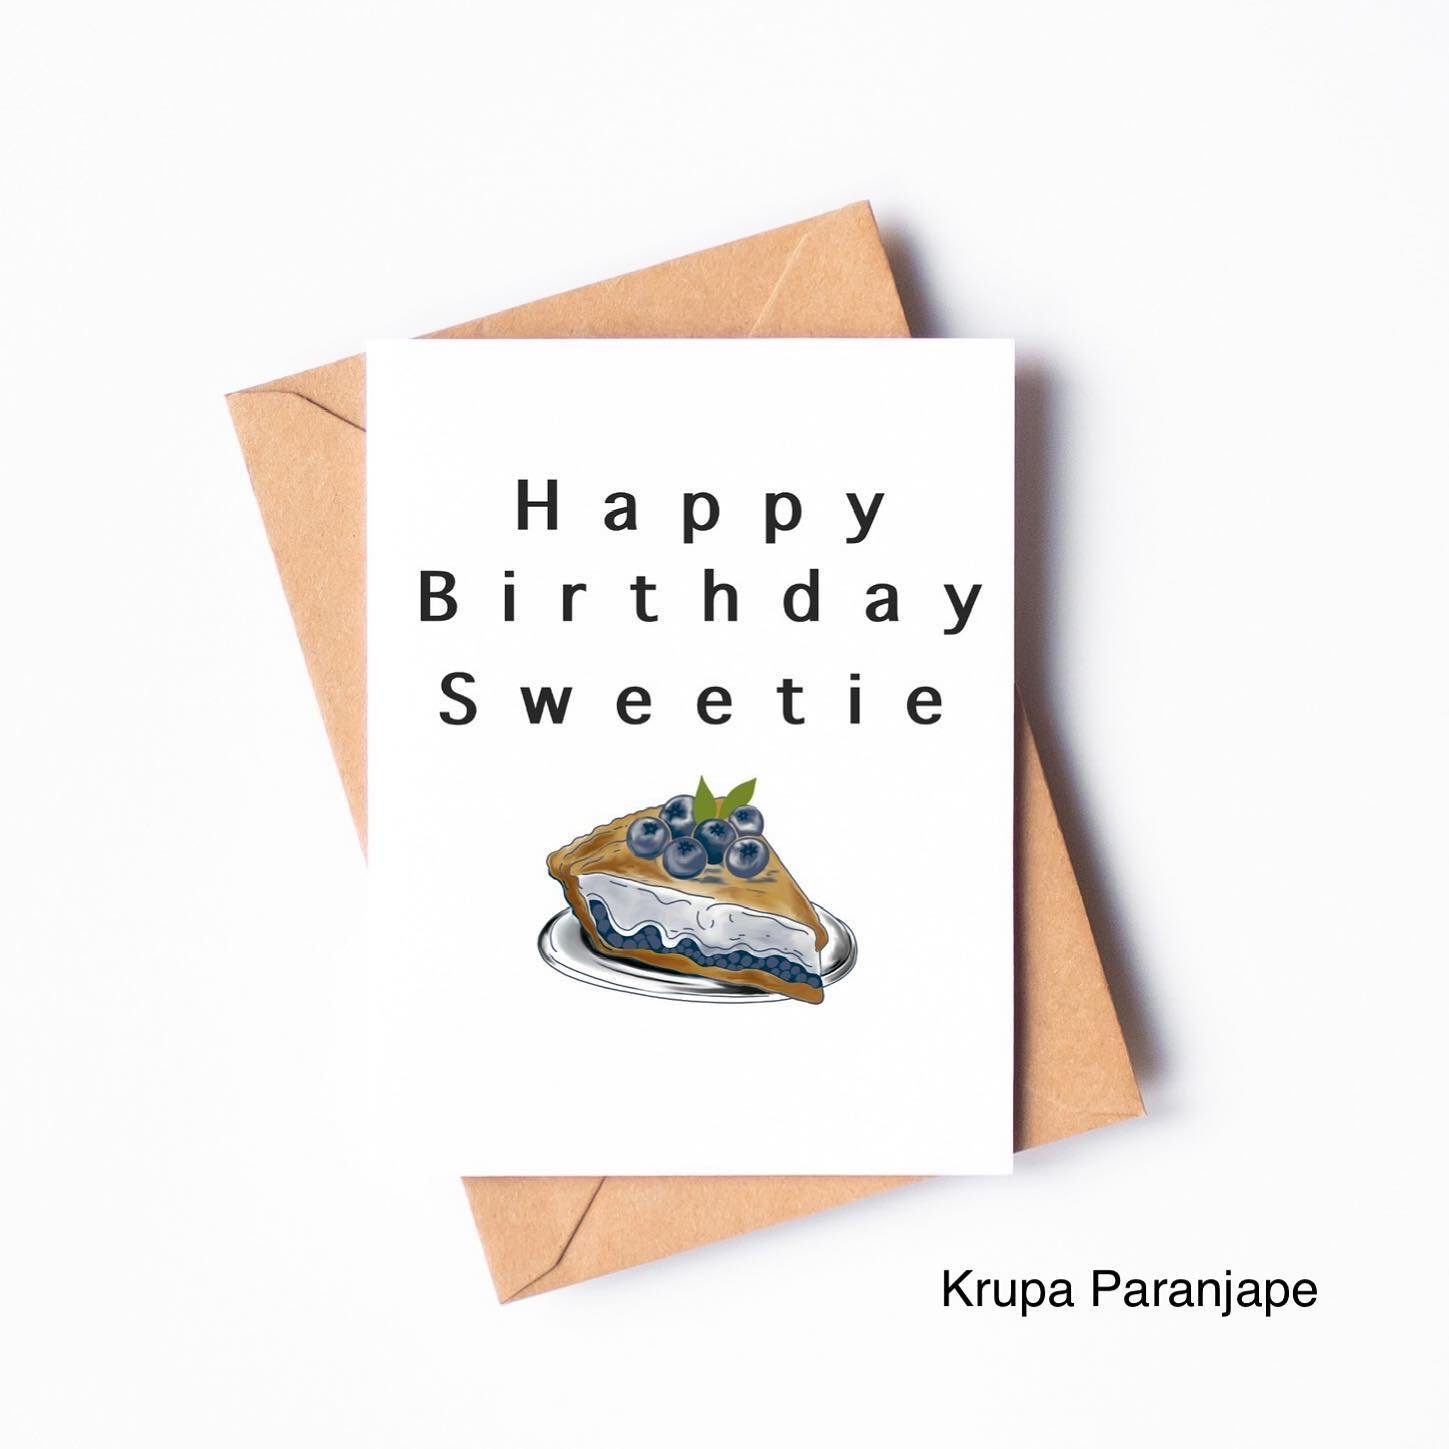 Celebrating our 1st Birthday as Krupa Paranjape LLC and Happy Pi Day. So grateful for the growth we have experienced in just a year. Thank you to all our supporters, clients for helping us grow and succeed! Here&rsquo;s to many more years of success 